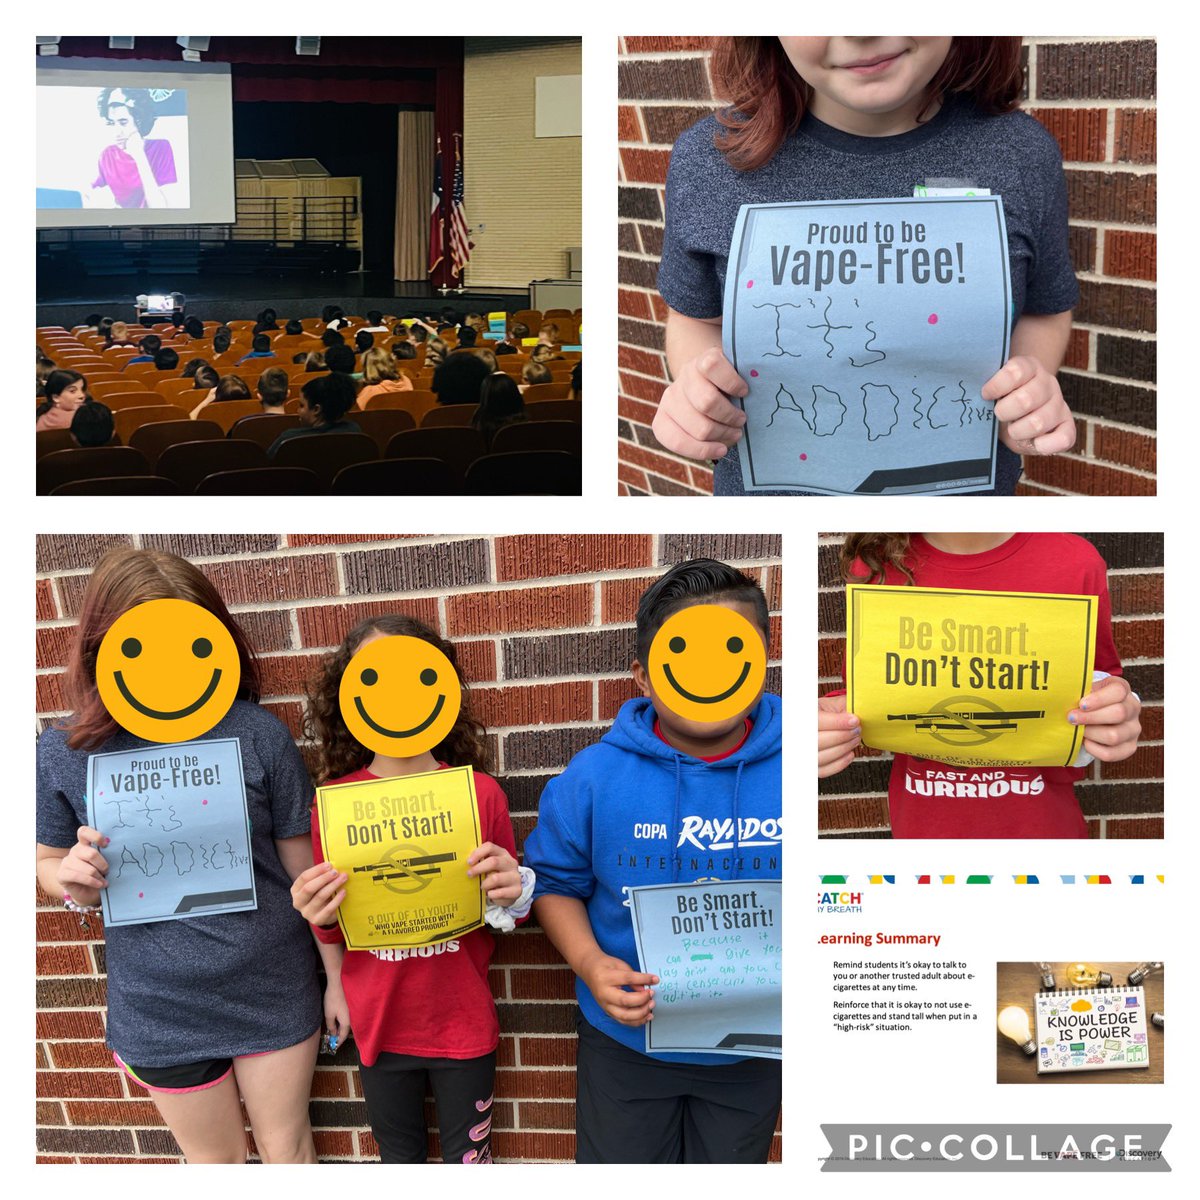 Our @TISDTIS cougars are proud to be #VapeFree! Special shout out to our awesome coaches for helping to facilitate lessons about making healthy choices. @SamoraDavis @MyriamKhan15 @Jenn_Moreno11 @HaleyAgriesti